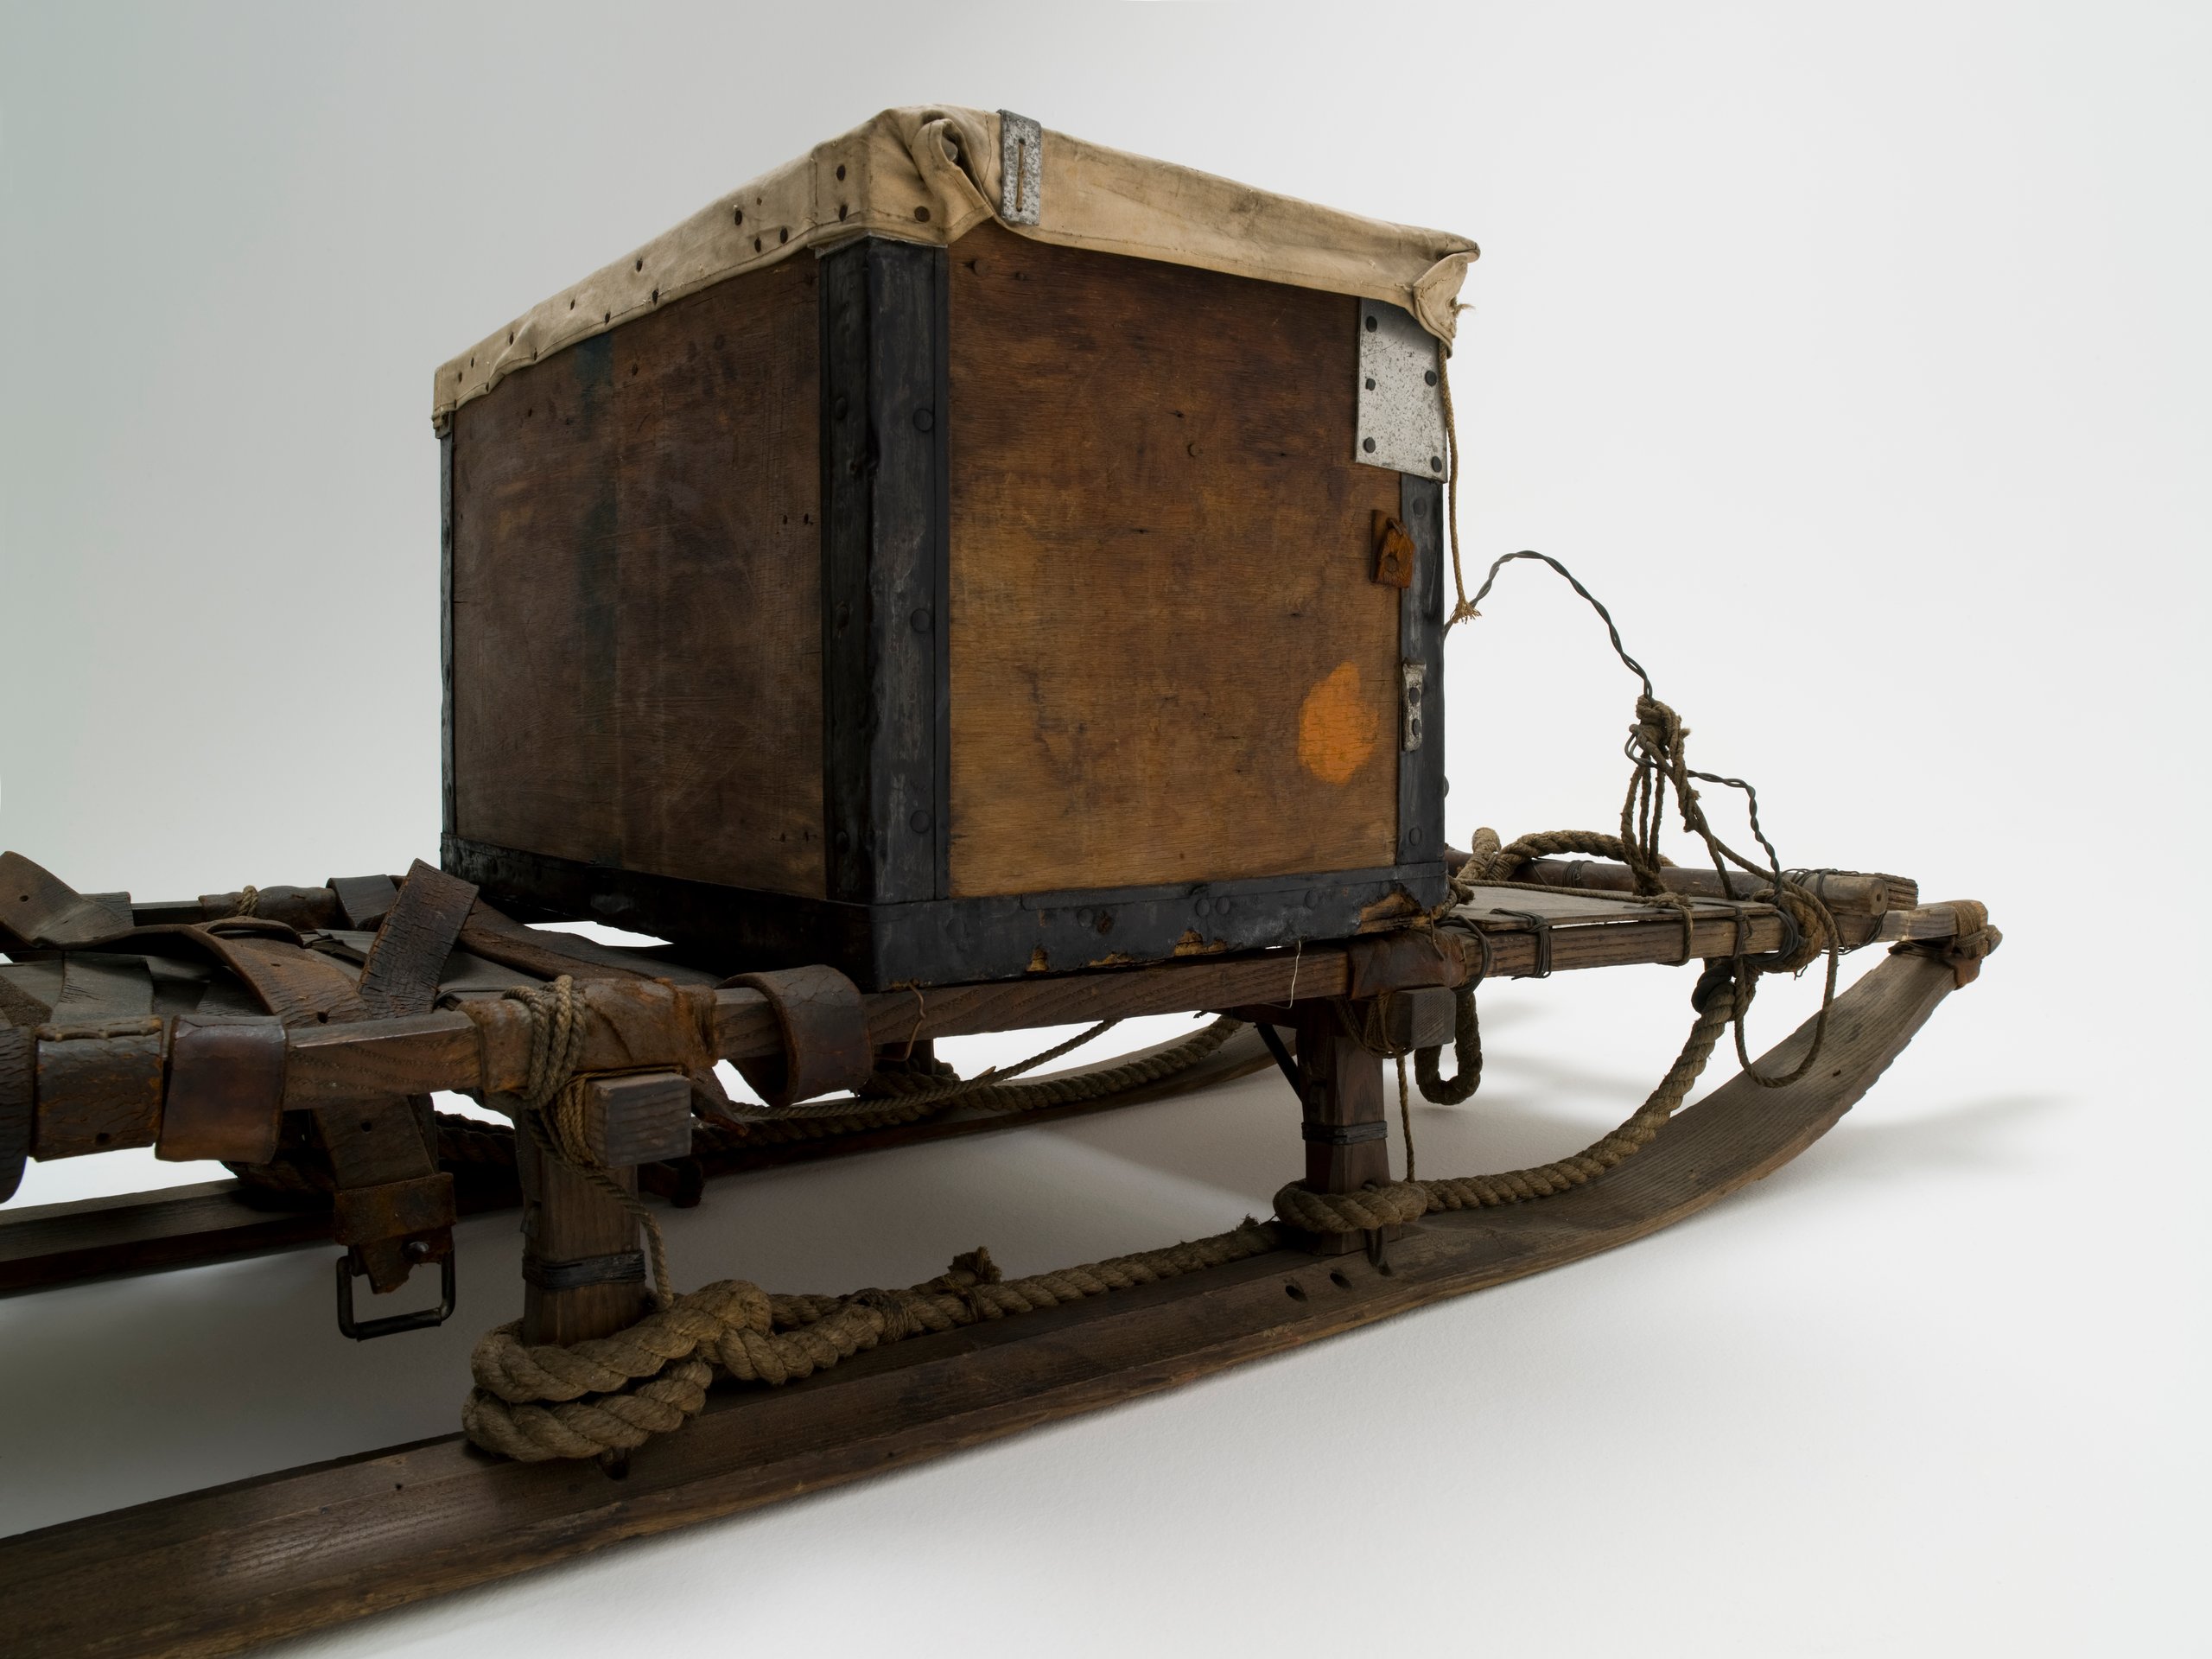 Antarctic sledge made by L Hagen, Norway, used on Douglas Mawson's Australiasian Antarctic Expedition, 1911-1914